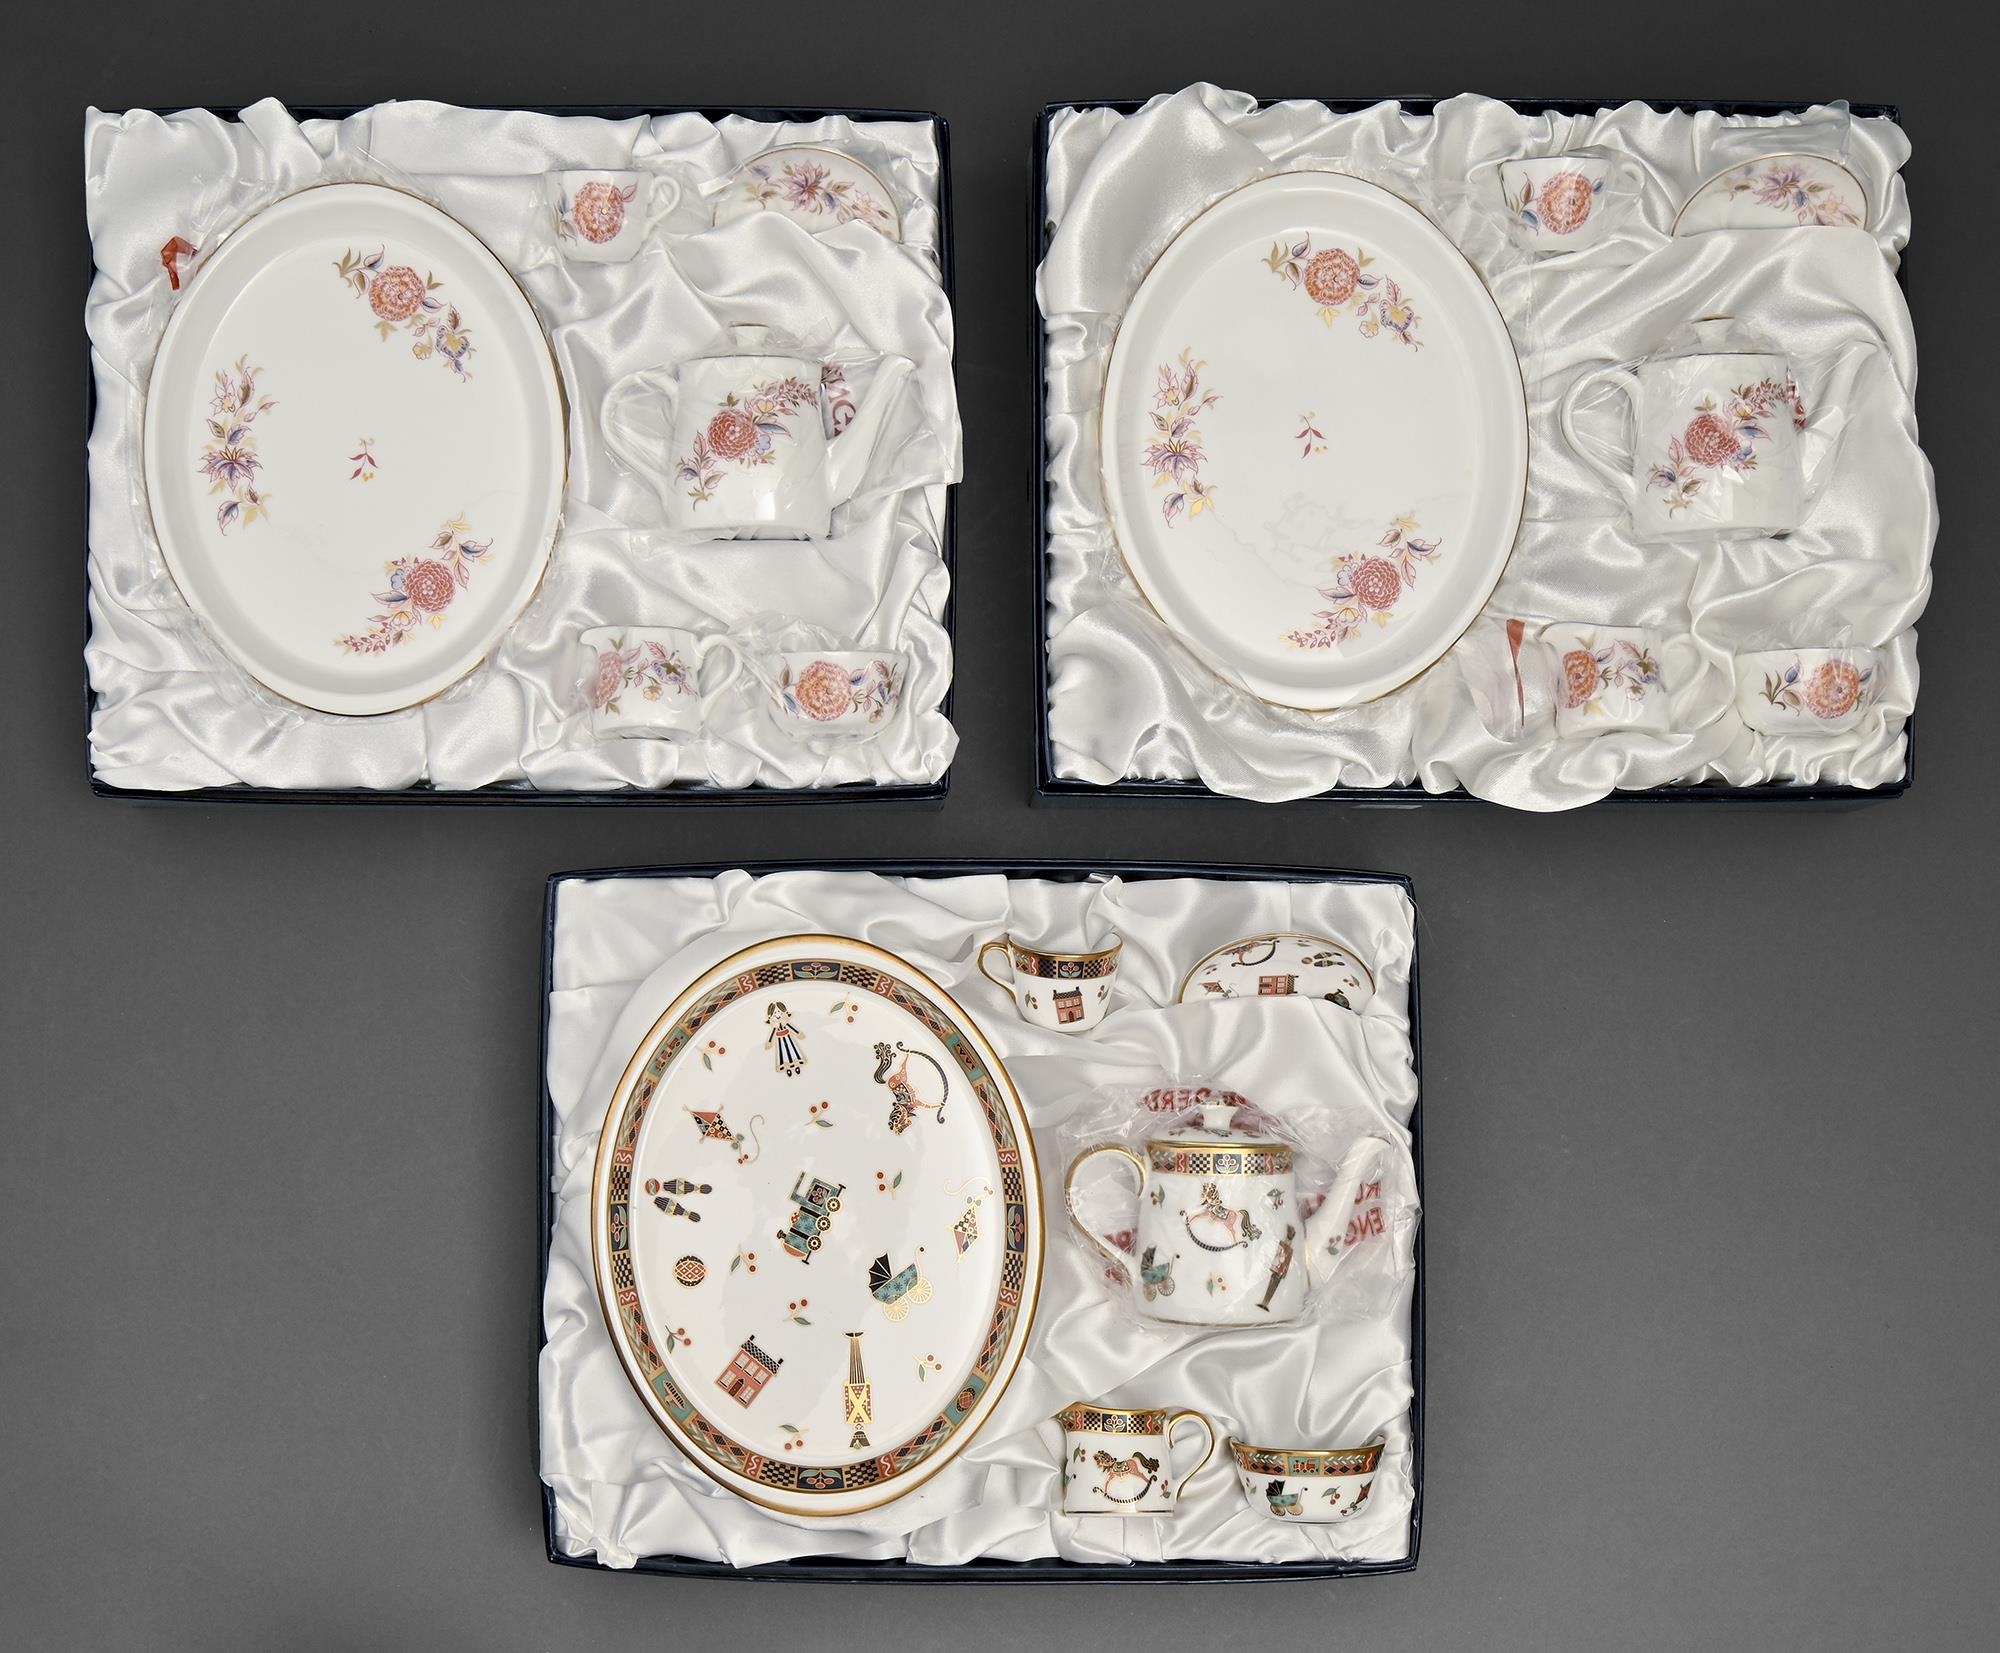 Three Royal Crown Derby miniature tea services, early 21st c, including Treasures of Childhood, each